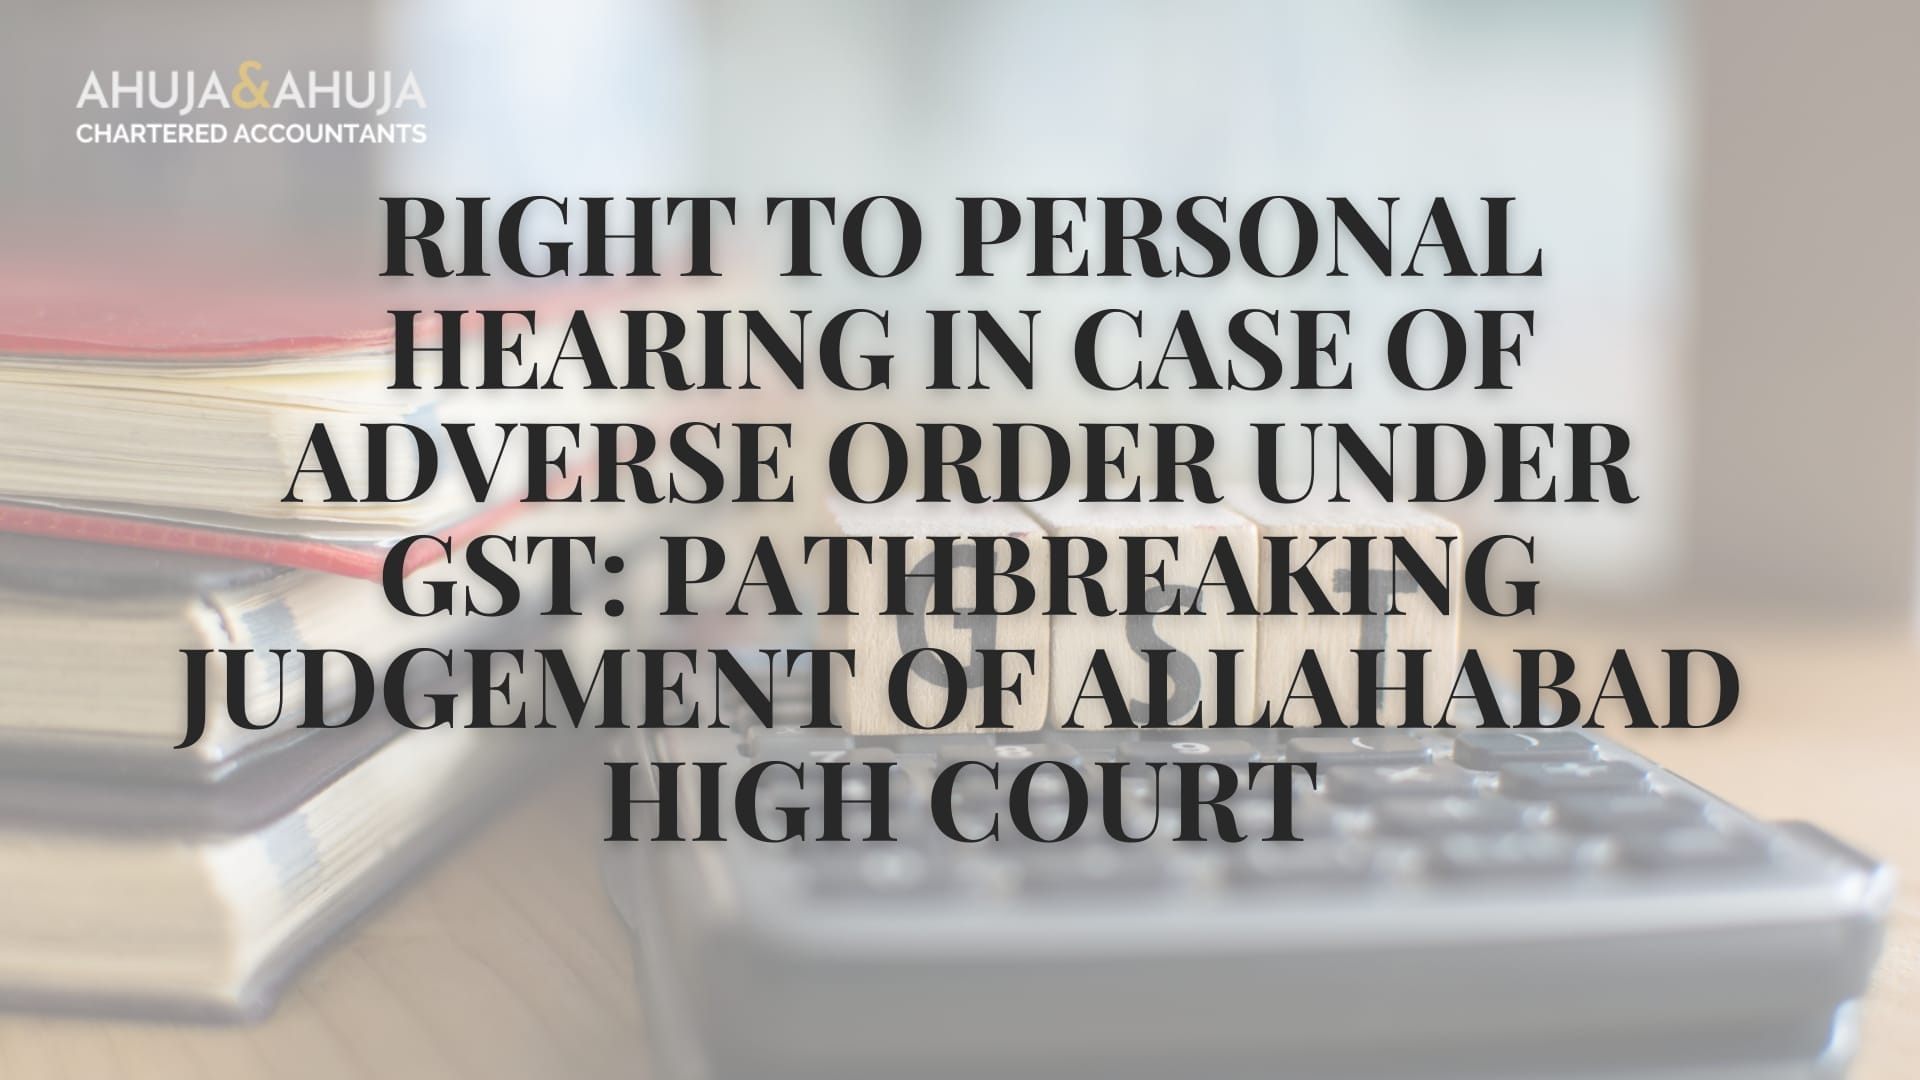 Right to Personal Hearing In Case of Adverse Order under GST